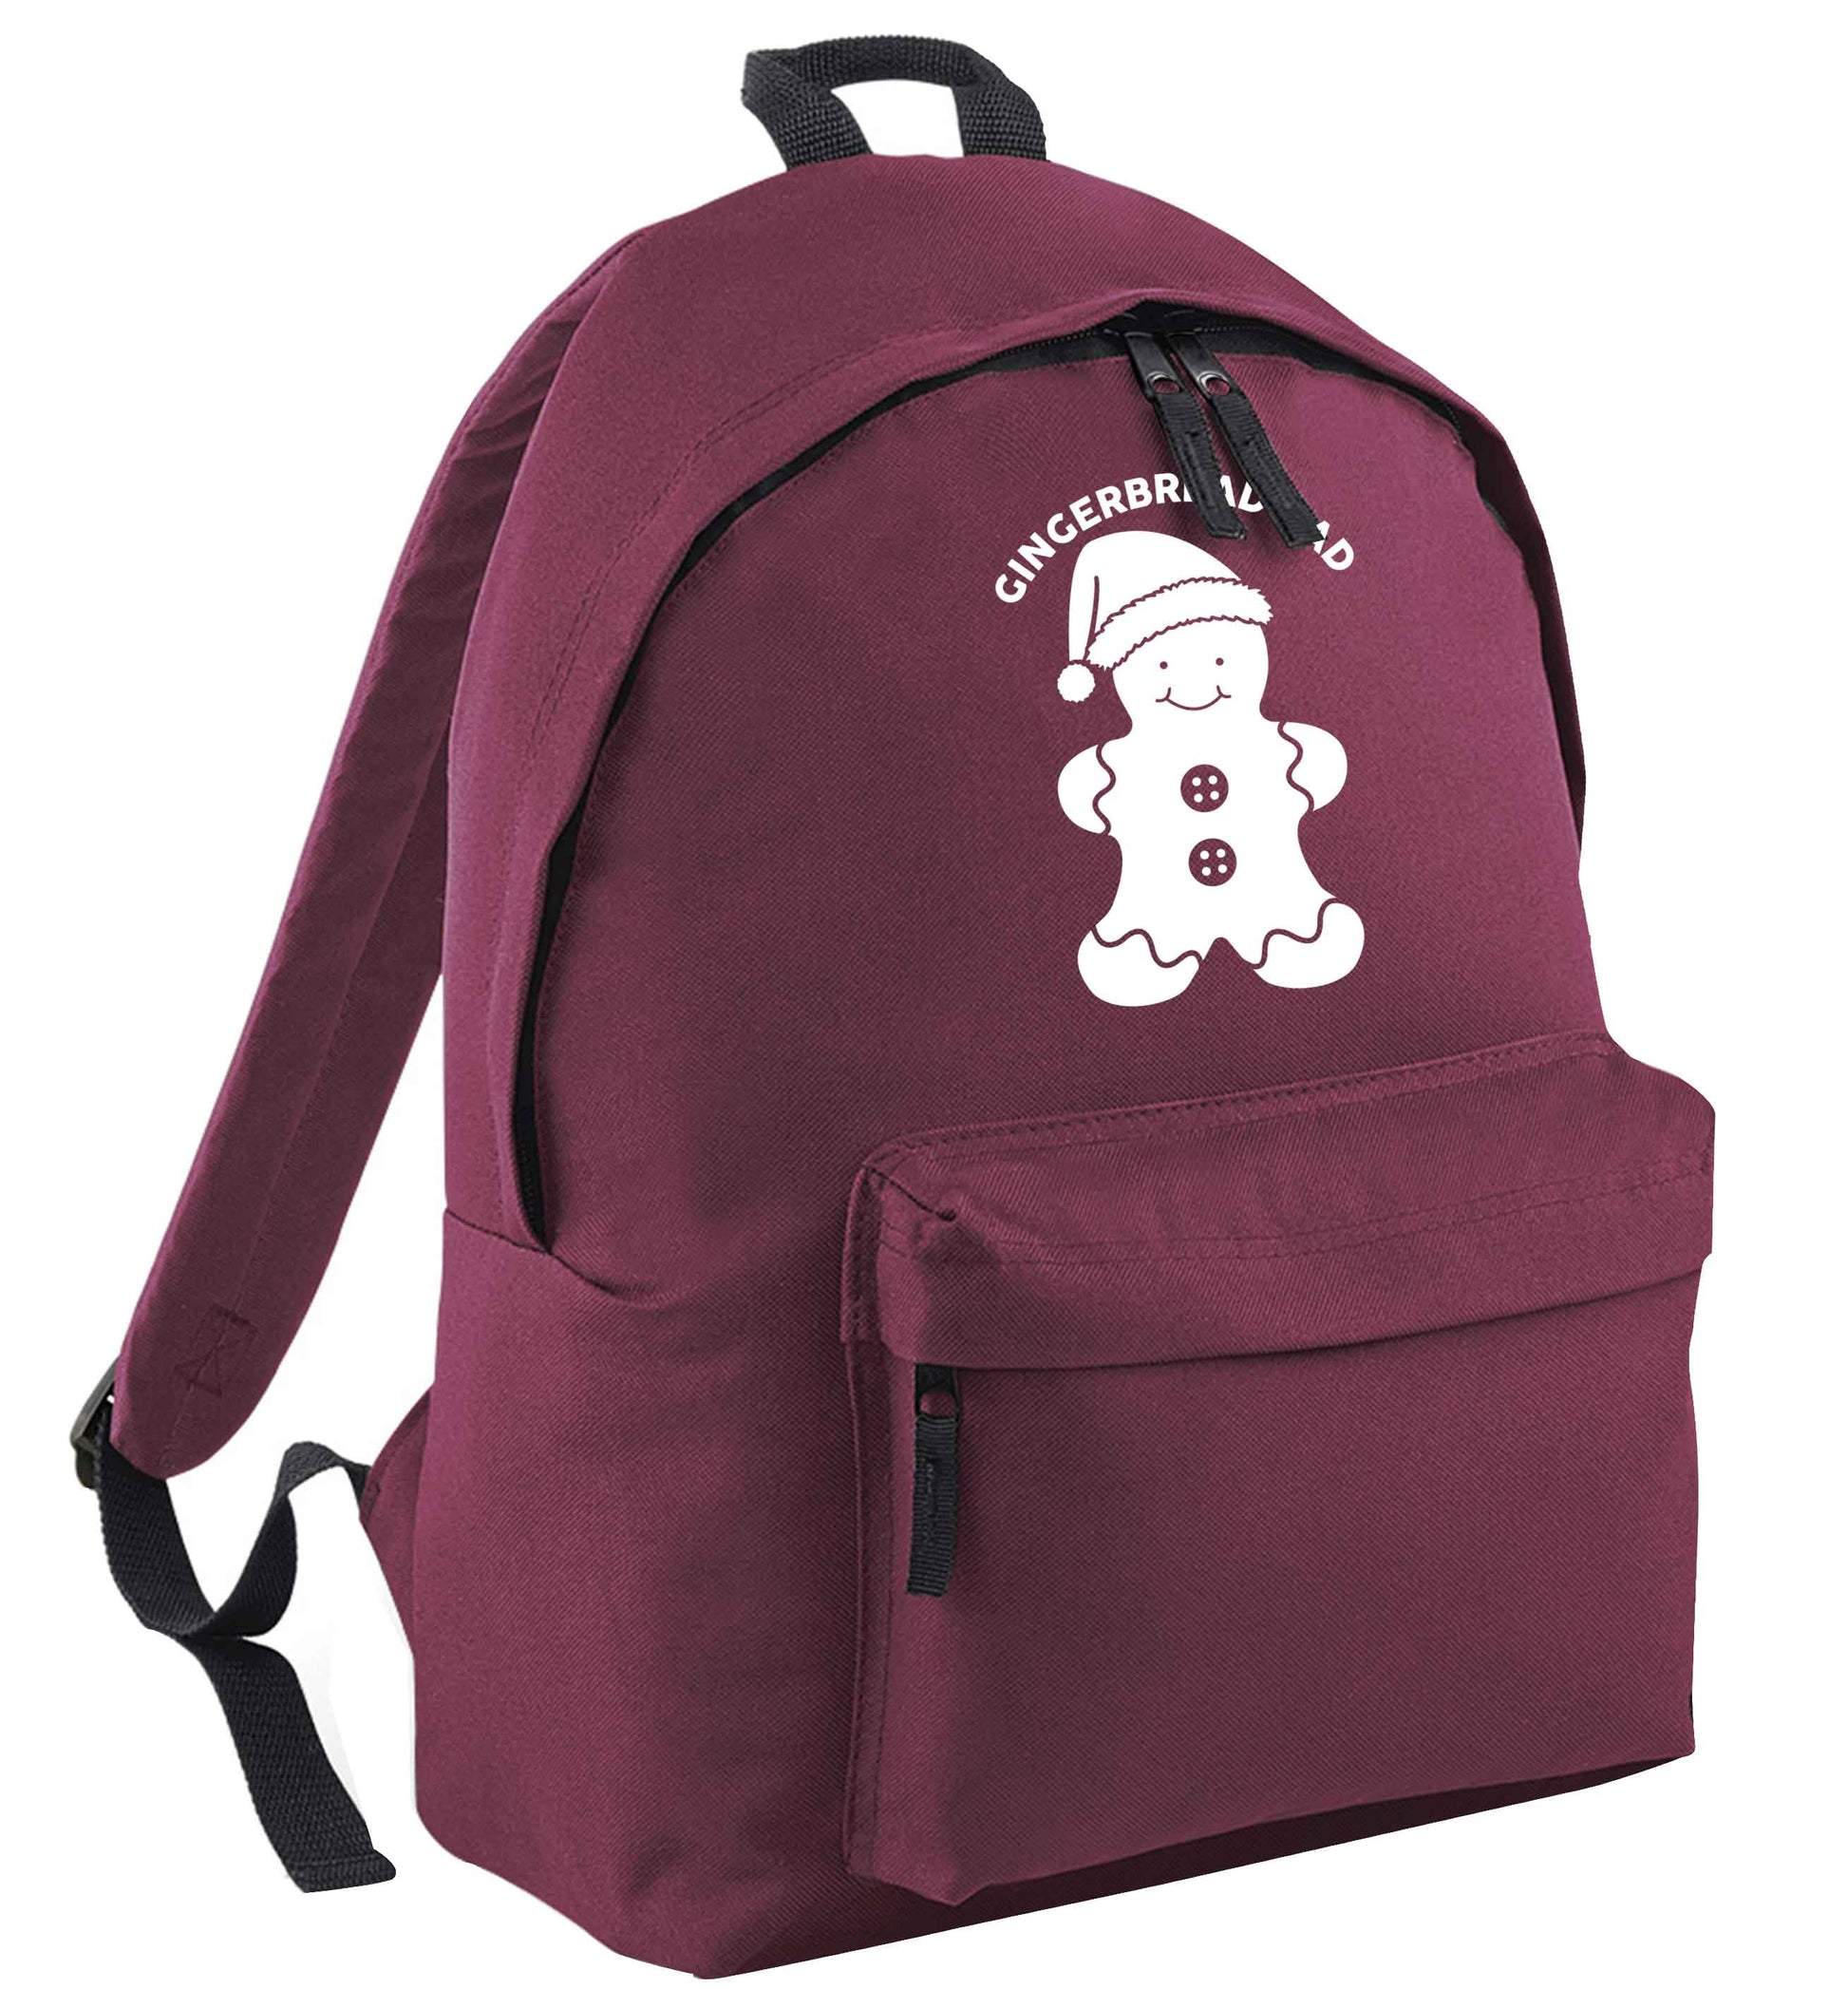 Merry Christmas maroon adults backpack